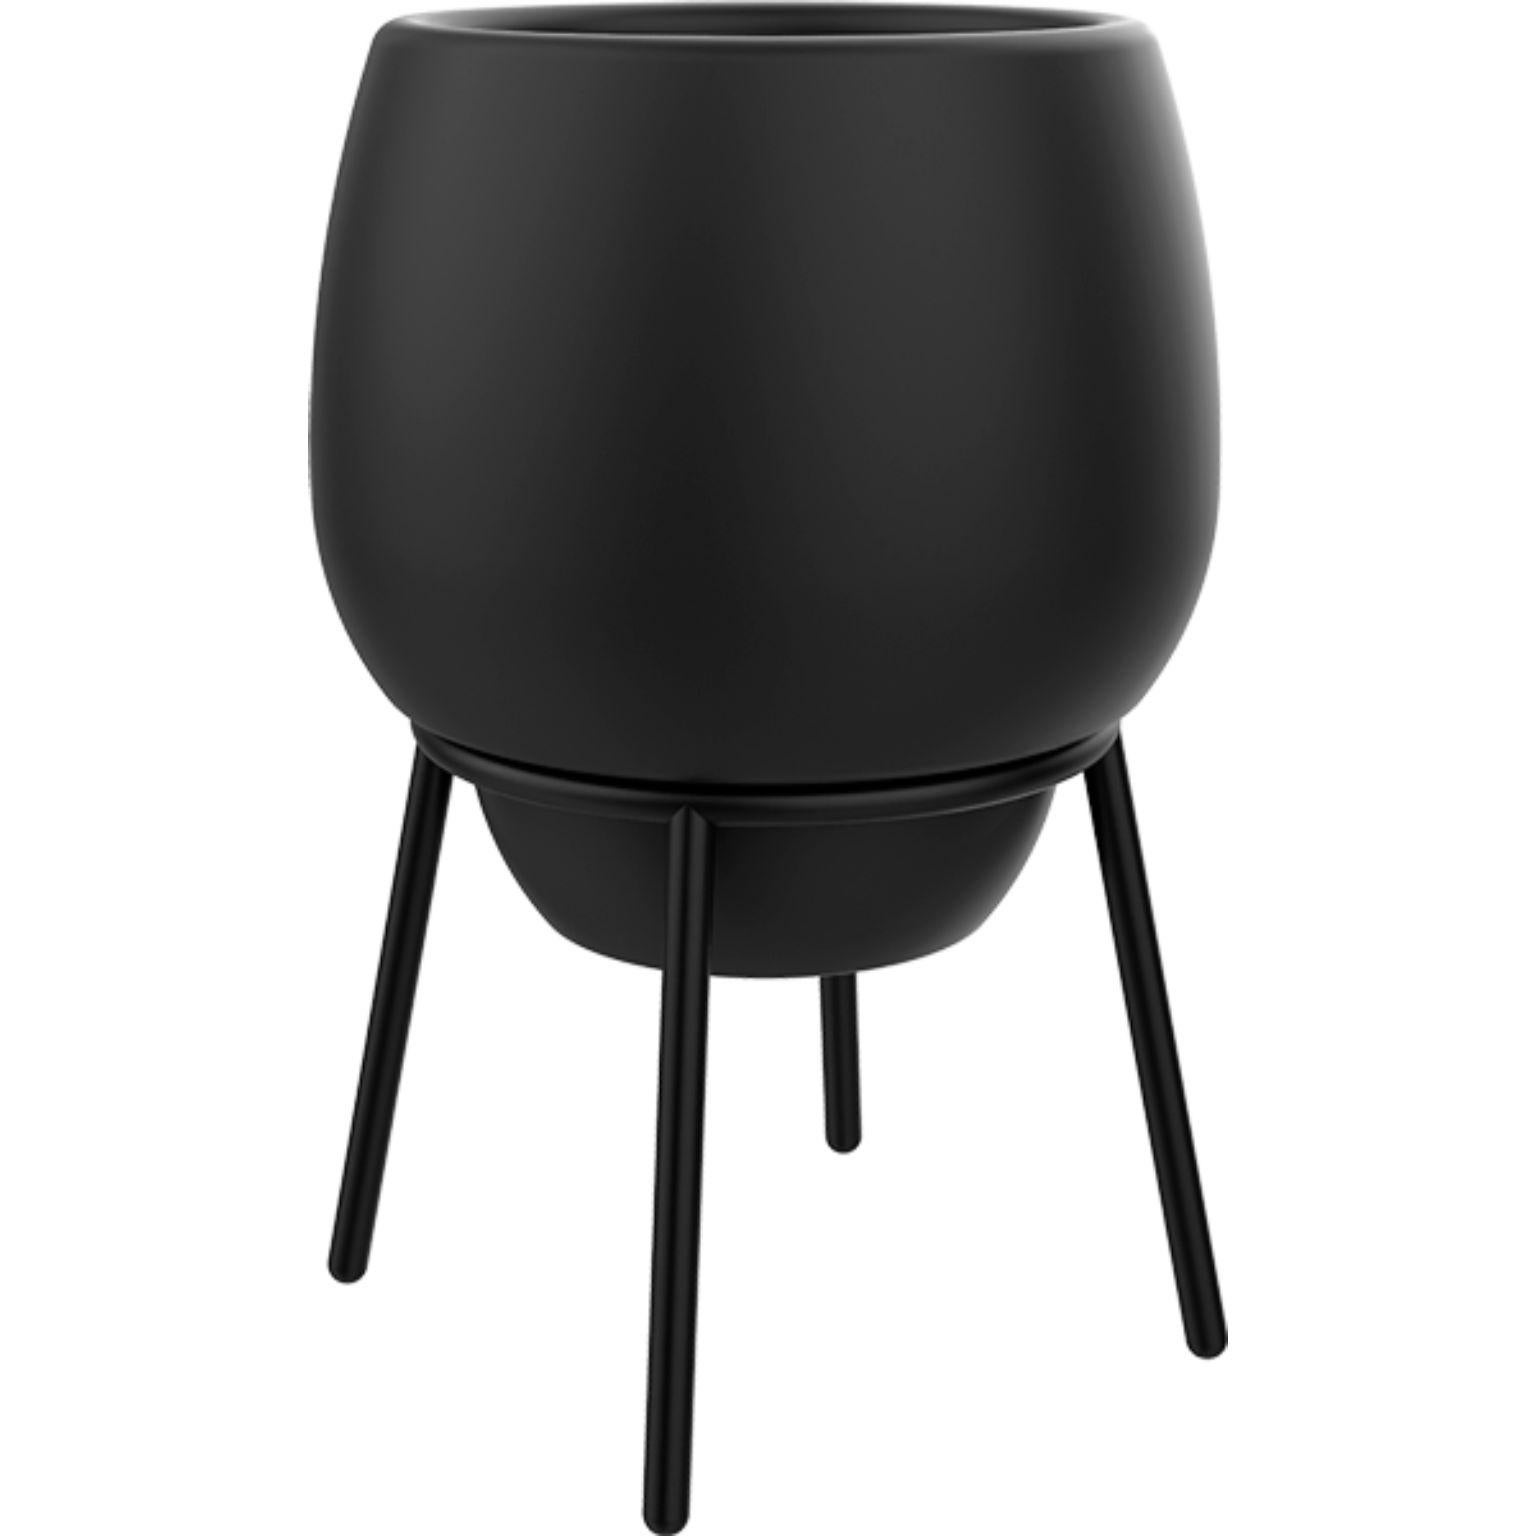 Lace black 50 low pot by Mowee
Dimensions: Ø 55 x H 76 cm.
Material: Polyethylene and stainless steel.
Weight: 6 kg.
Also available in different colors and finishes (Lacquered or retroilluminated).

Lace is a collection of furniture made by